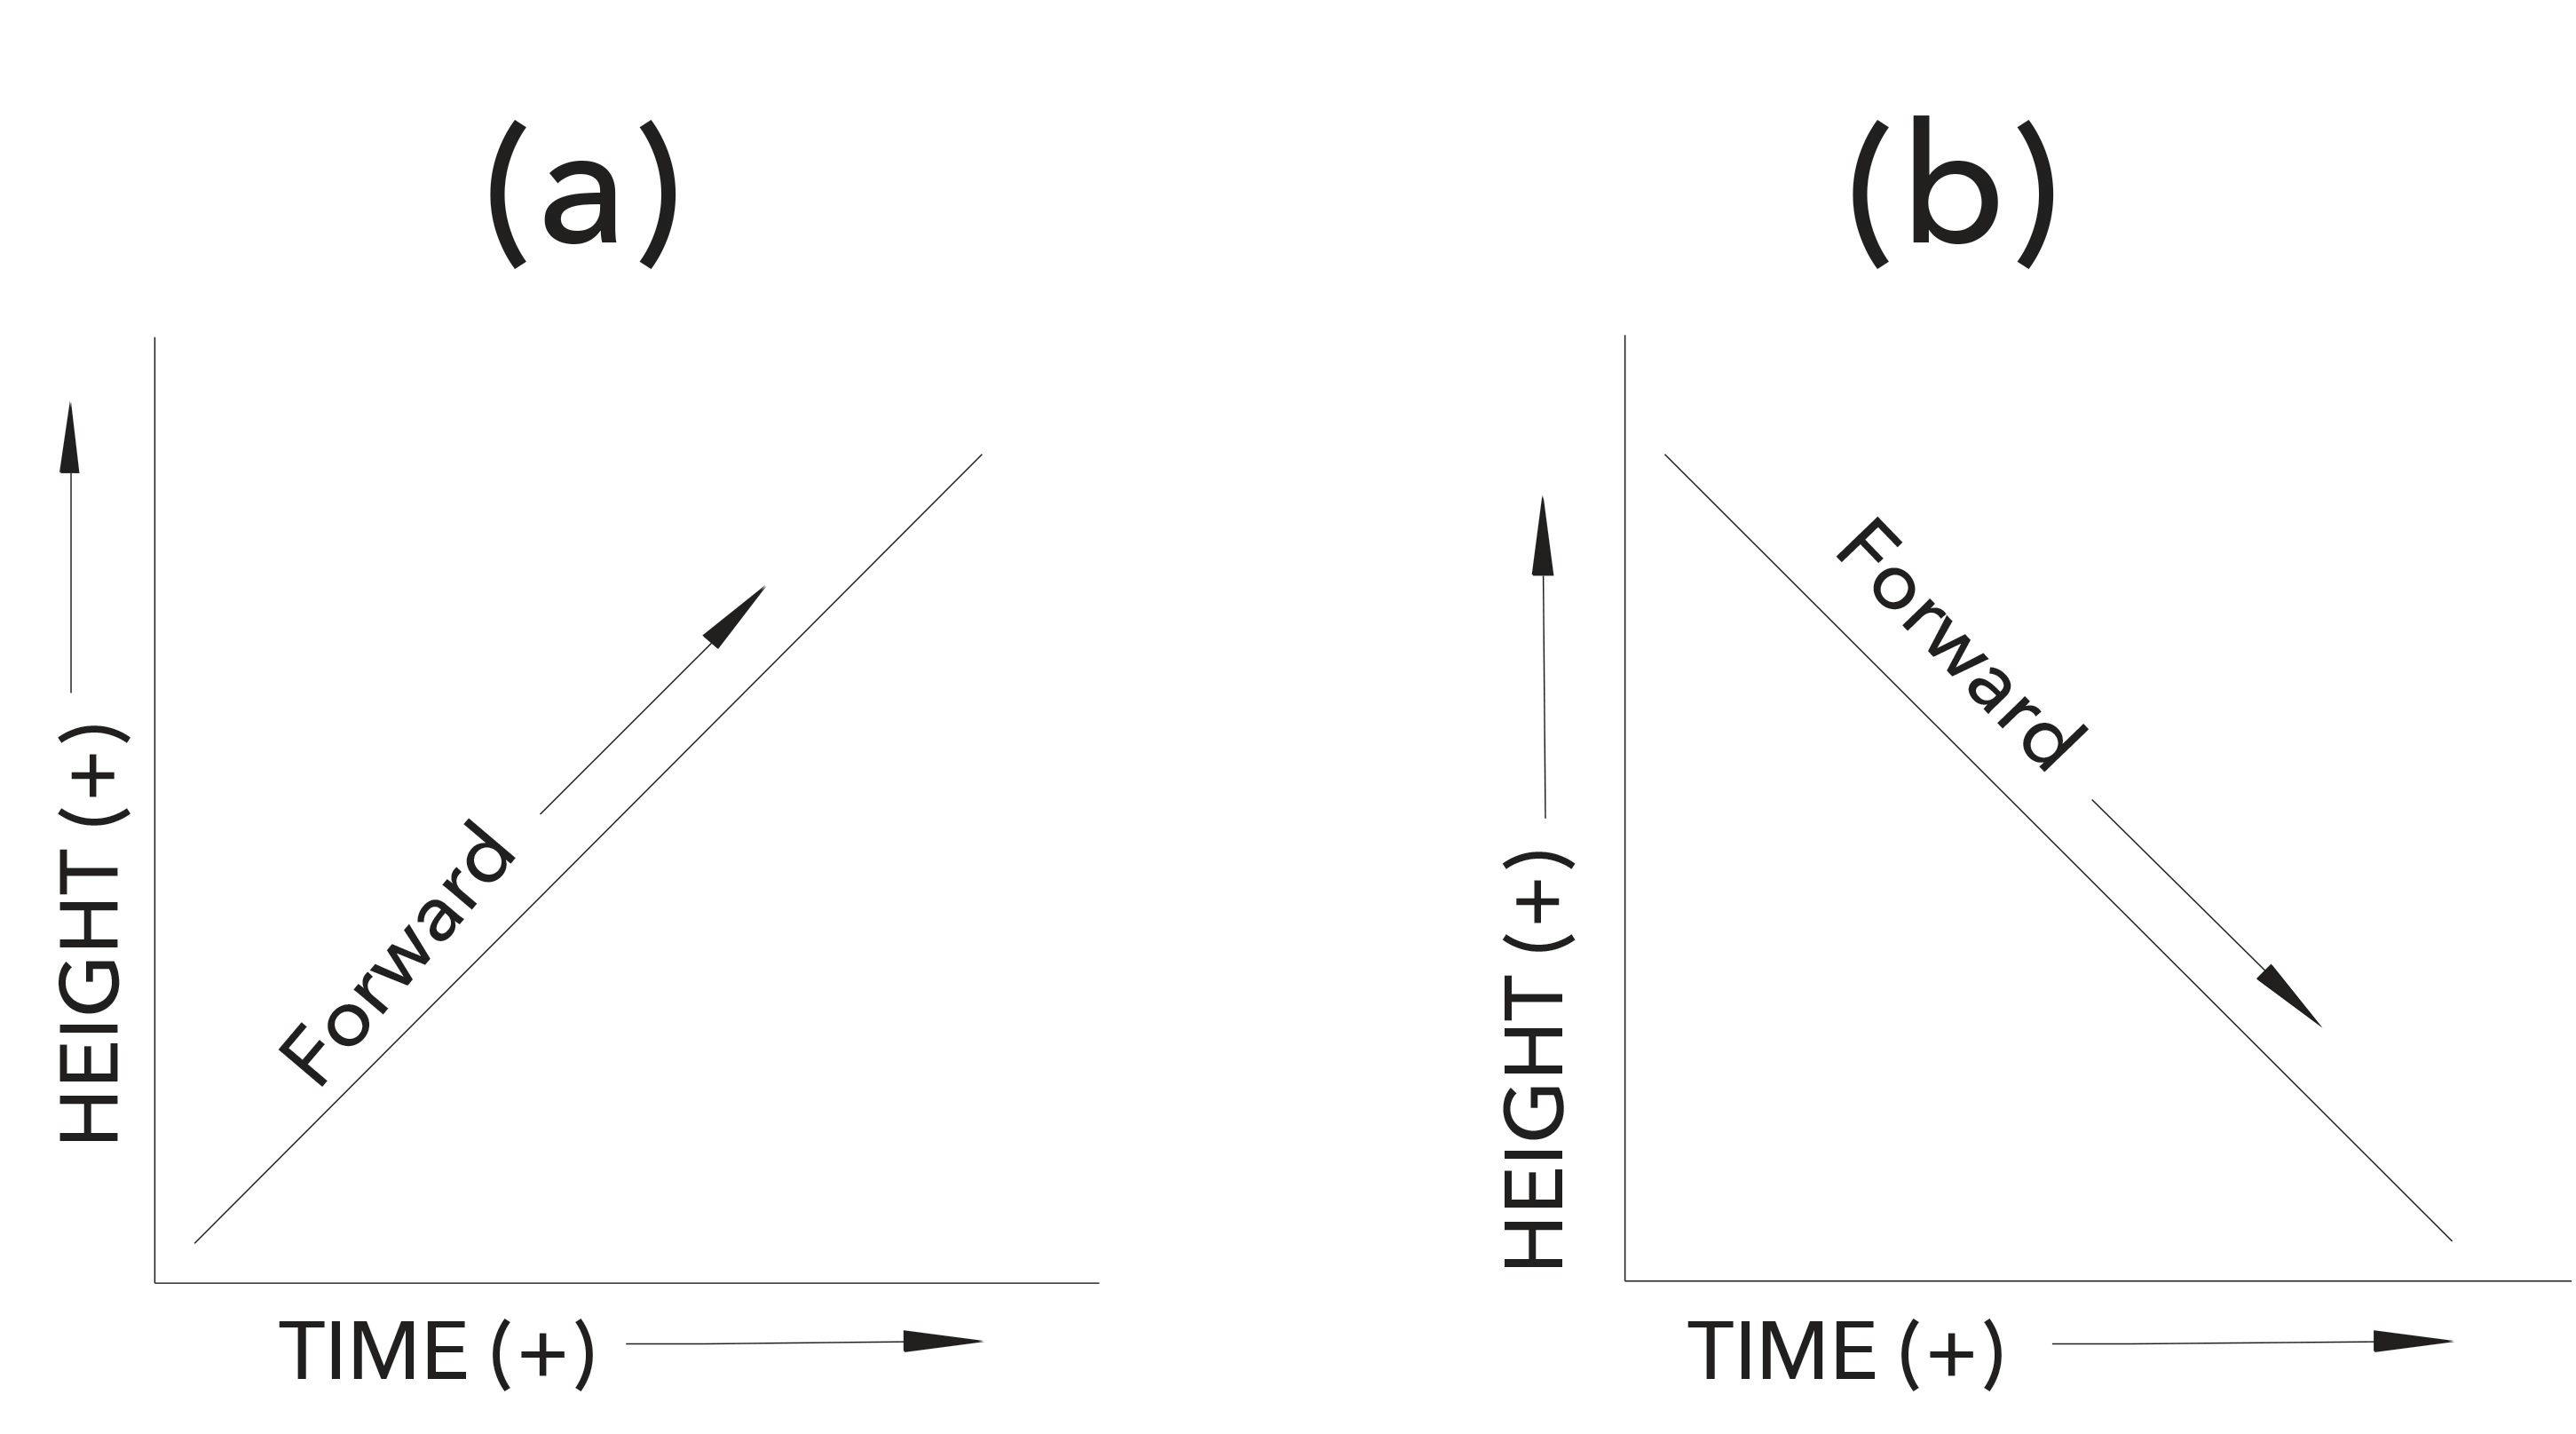 FIGURE 1: Schematic illustration of movement on a hill. In both parts of the figure, time is positive going toward the right, and height is positive upward. In part (a), movement with increasing time is up the hill (+), while in part (b), movement is down the hill (-). In both cases, moving toward “negative time” inverts the nature of the change in altitude.